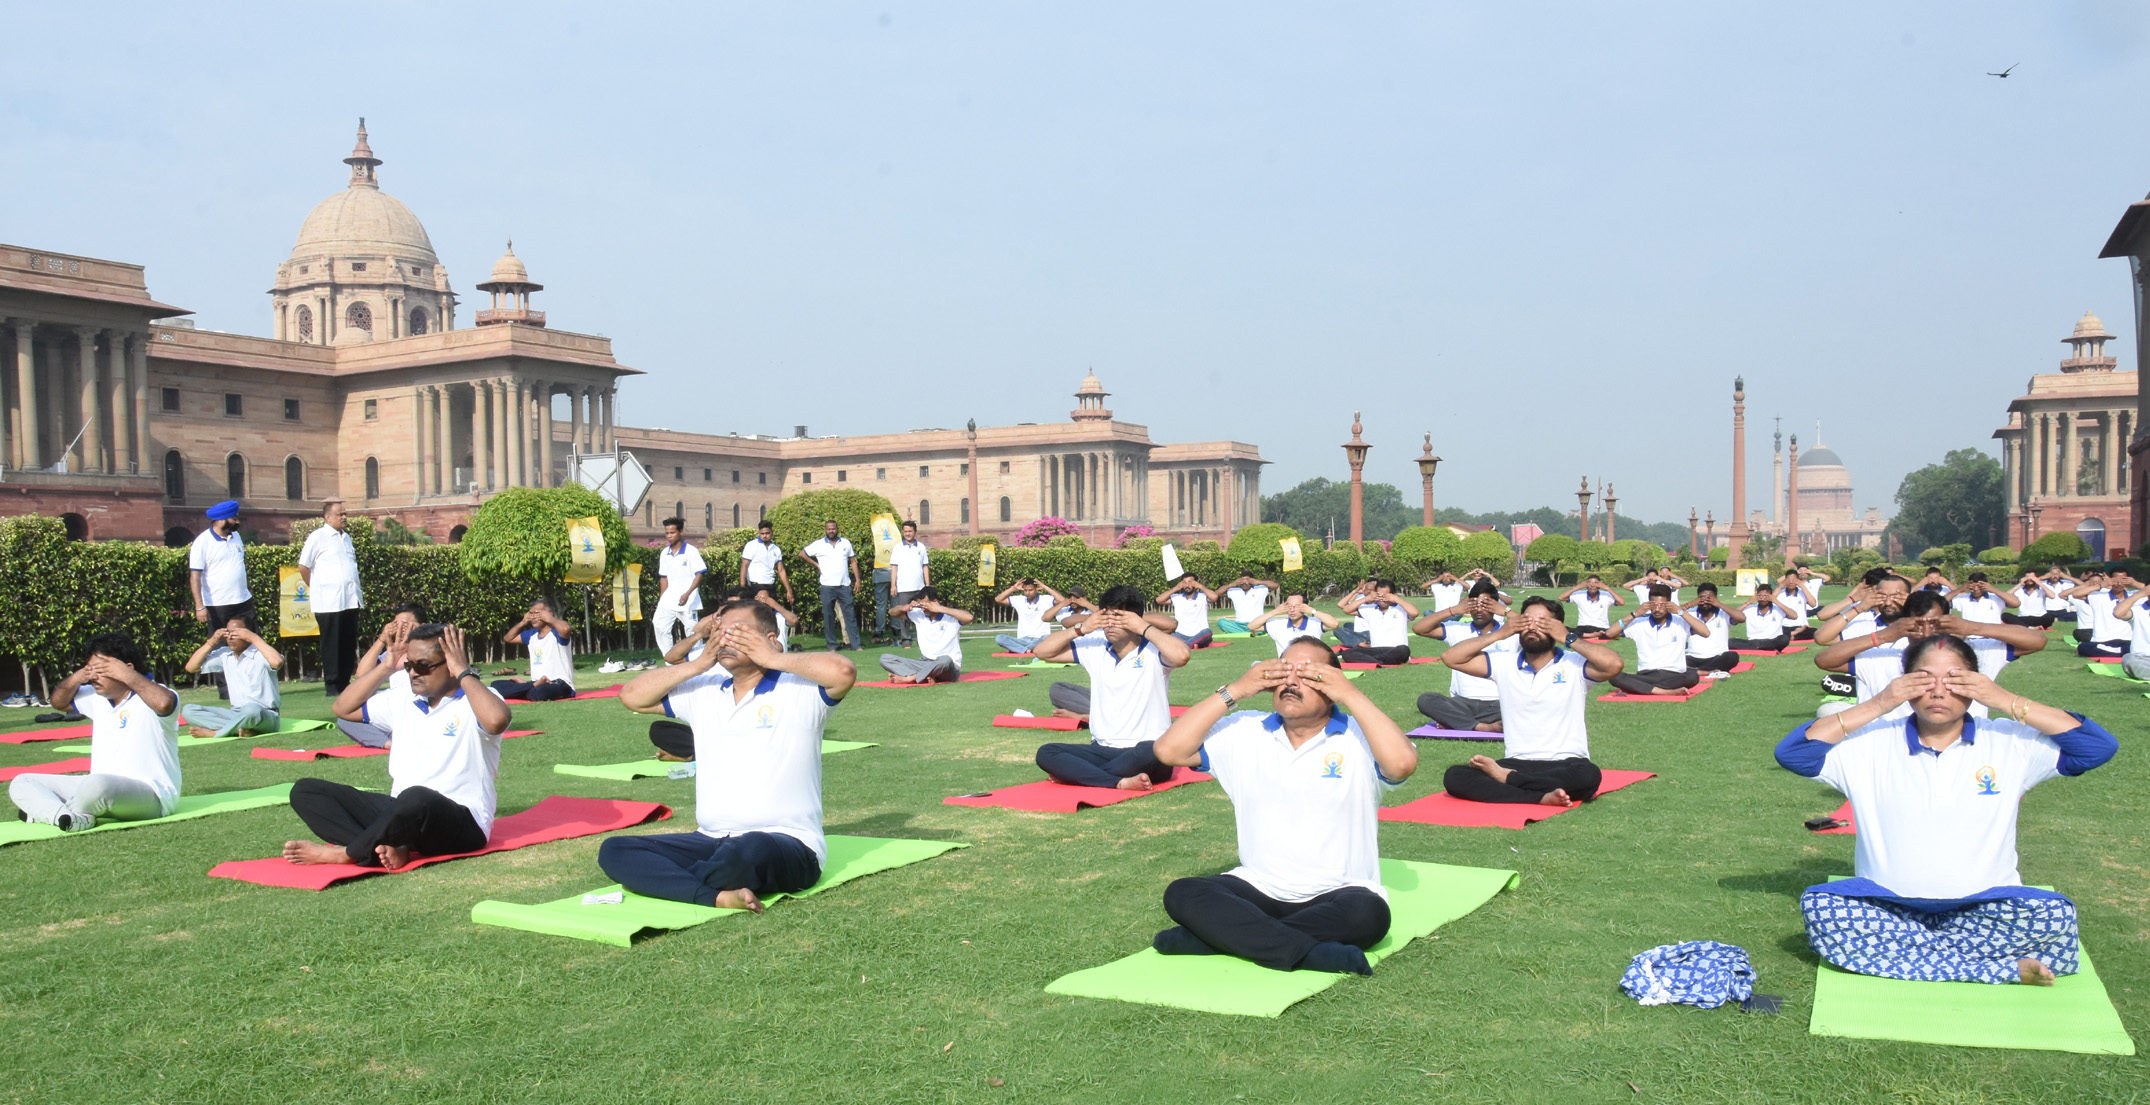 The Minister of State for Development of North Eastern Region (I/C), Prime Ministers Office, Personnel, Public Grievances & Pensions, Atomic Energy and Space, Dr. Jitendra Singh performing Yoga, on the occasion of the 5th International Day of Yoga 2019, organised by the Department of Pension and Pensioners Welfare, Ministry of Personnel, Public Grievances and Pensions, at North Block, in New Delhi on June 21, 2019. The Secretary, DoPT, Dr. C. Chandramouli is also seen.